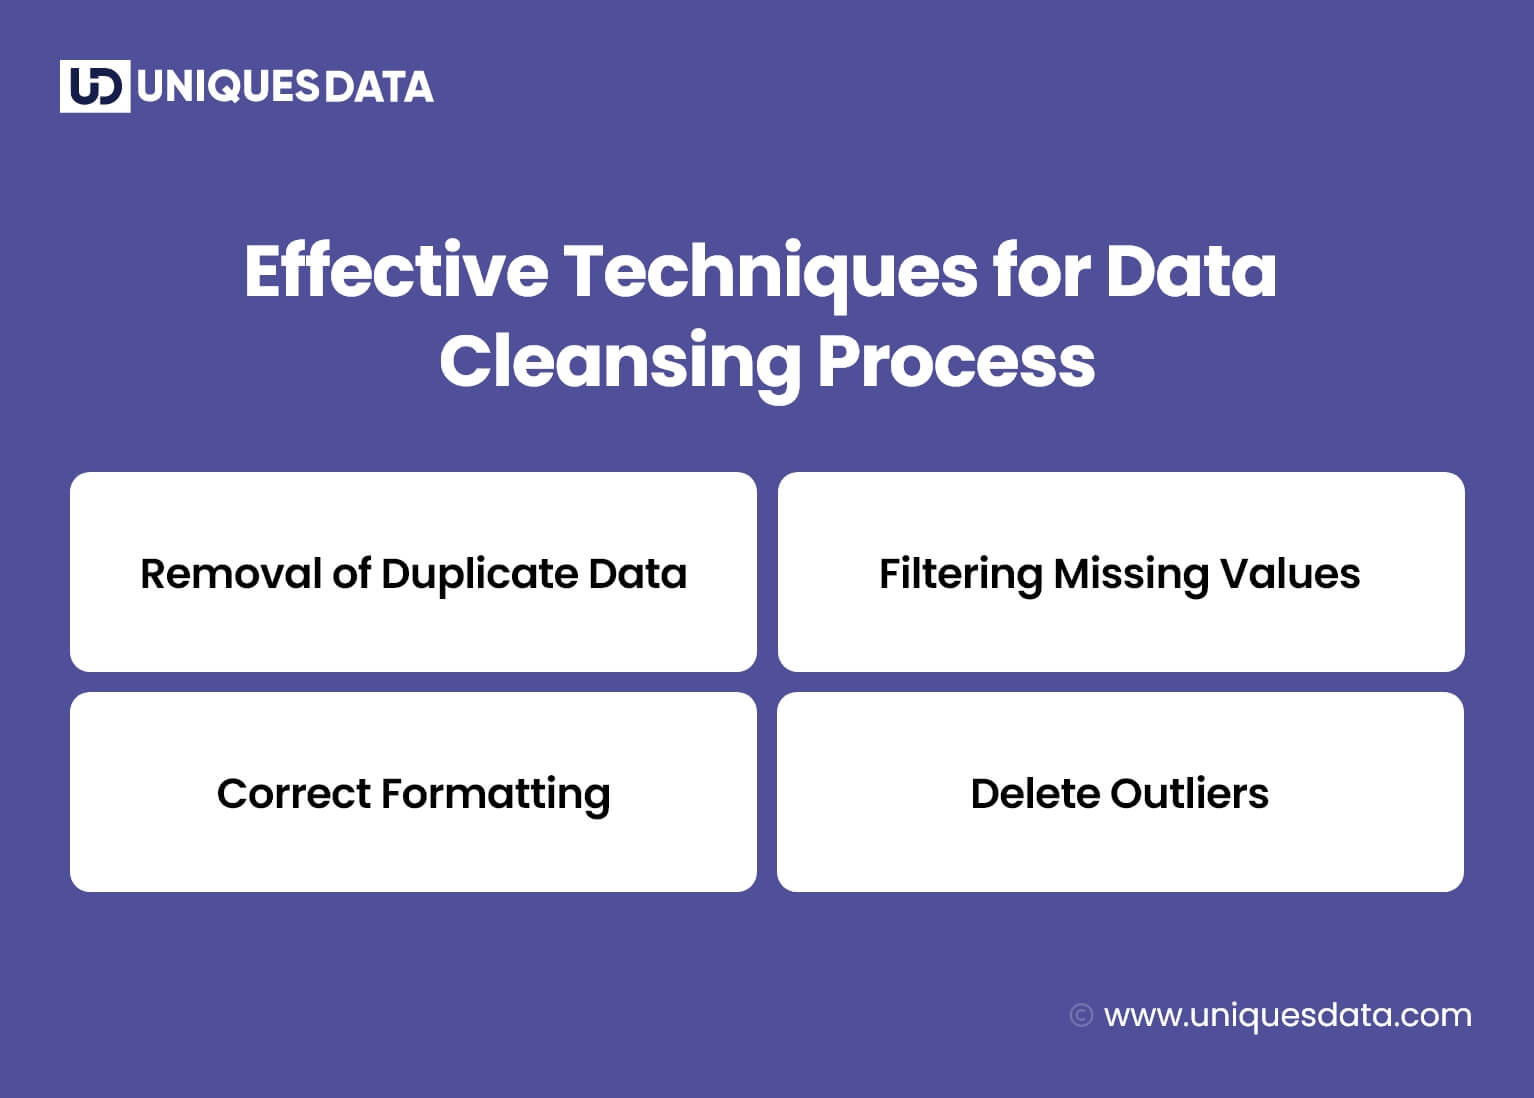 Effective Techniques for Data Cleansing Process